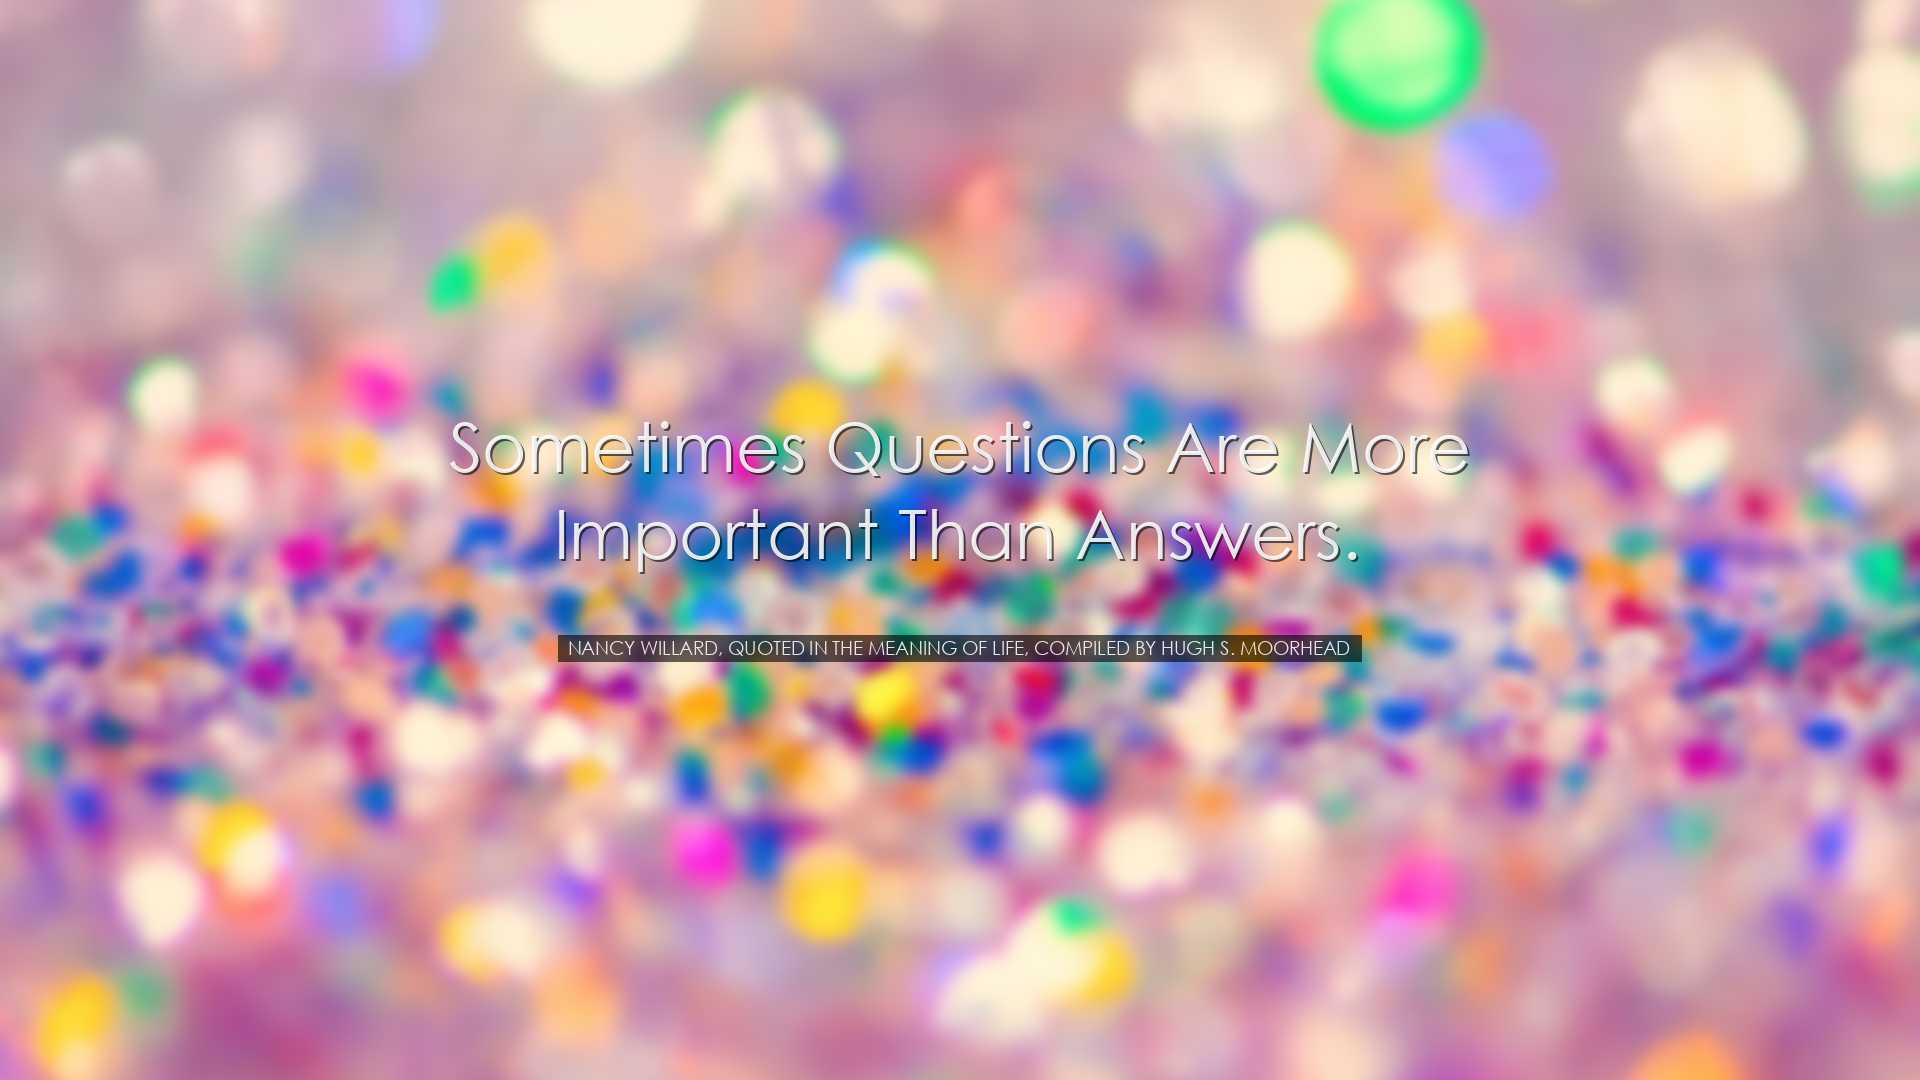 Sometimes questions are more important than answers. - Nancy Willa